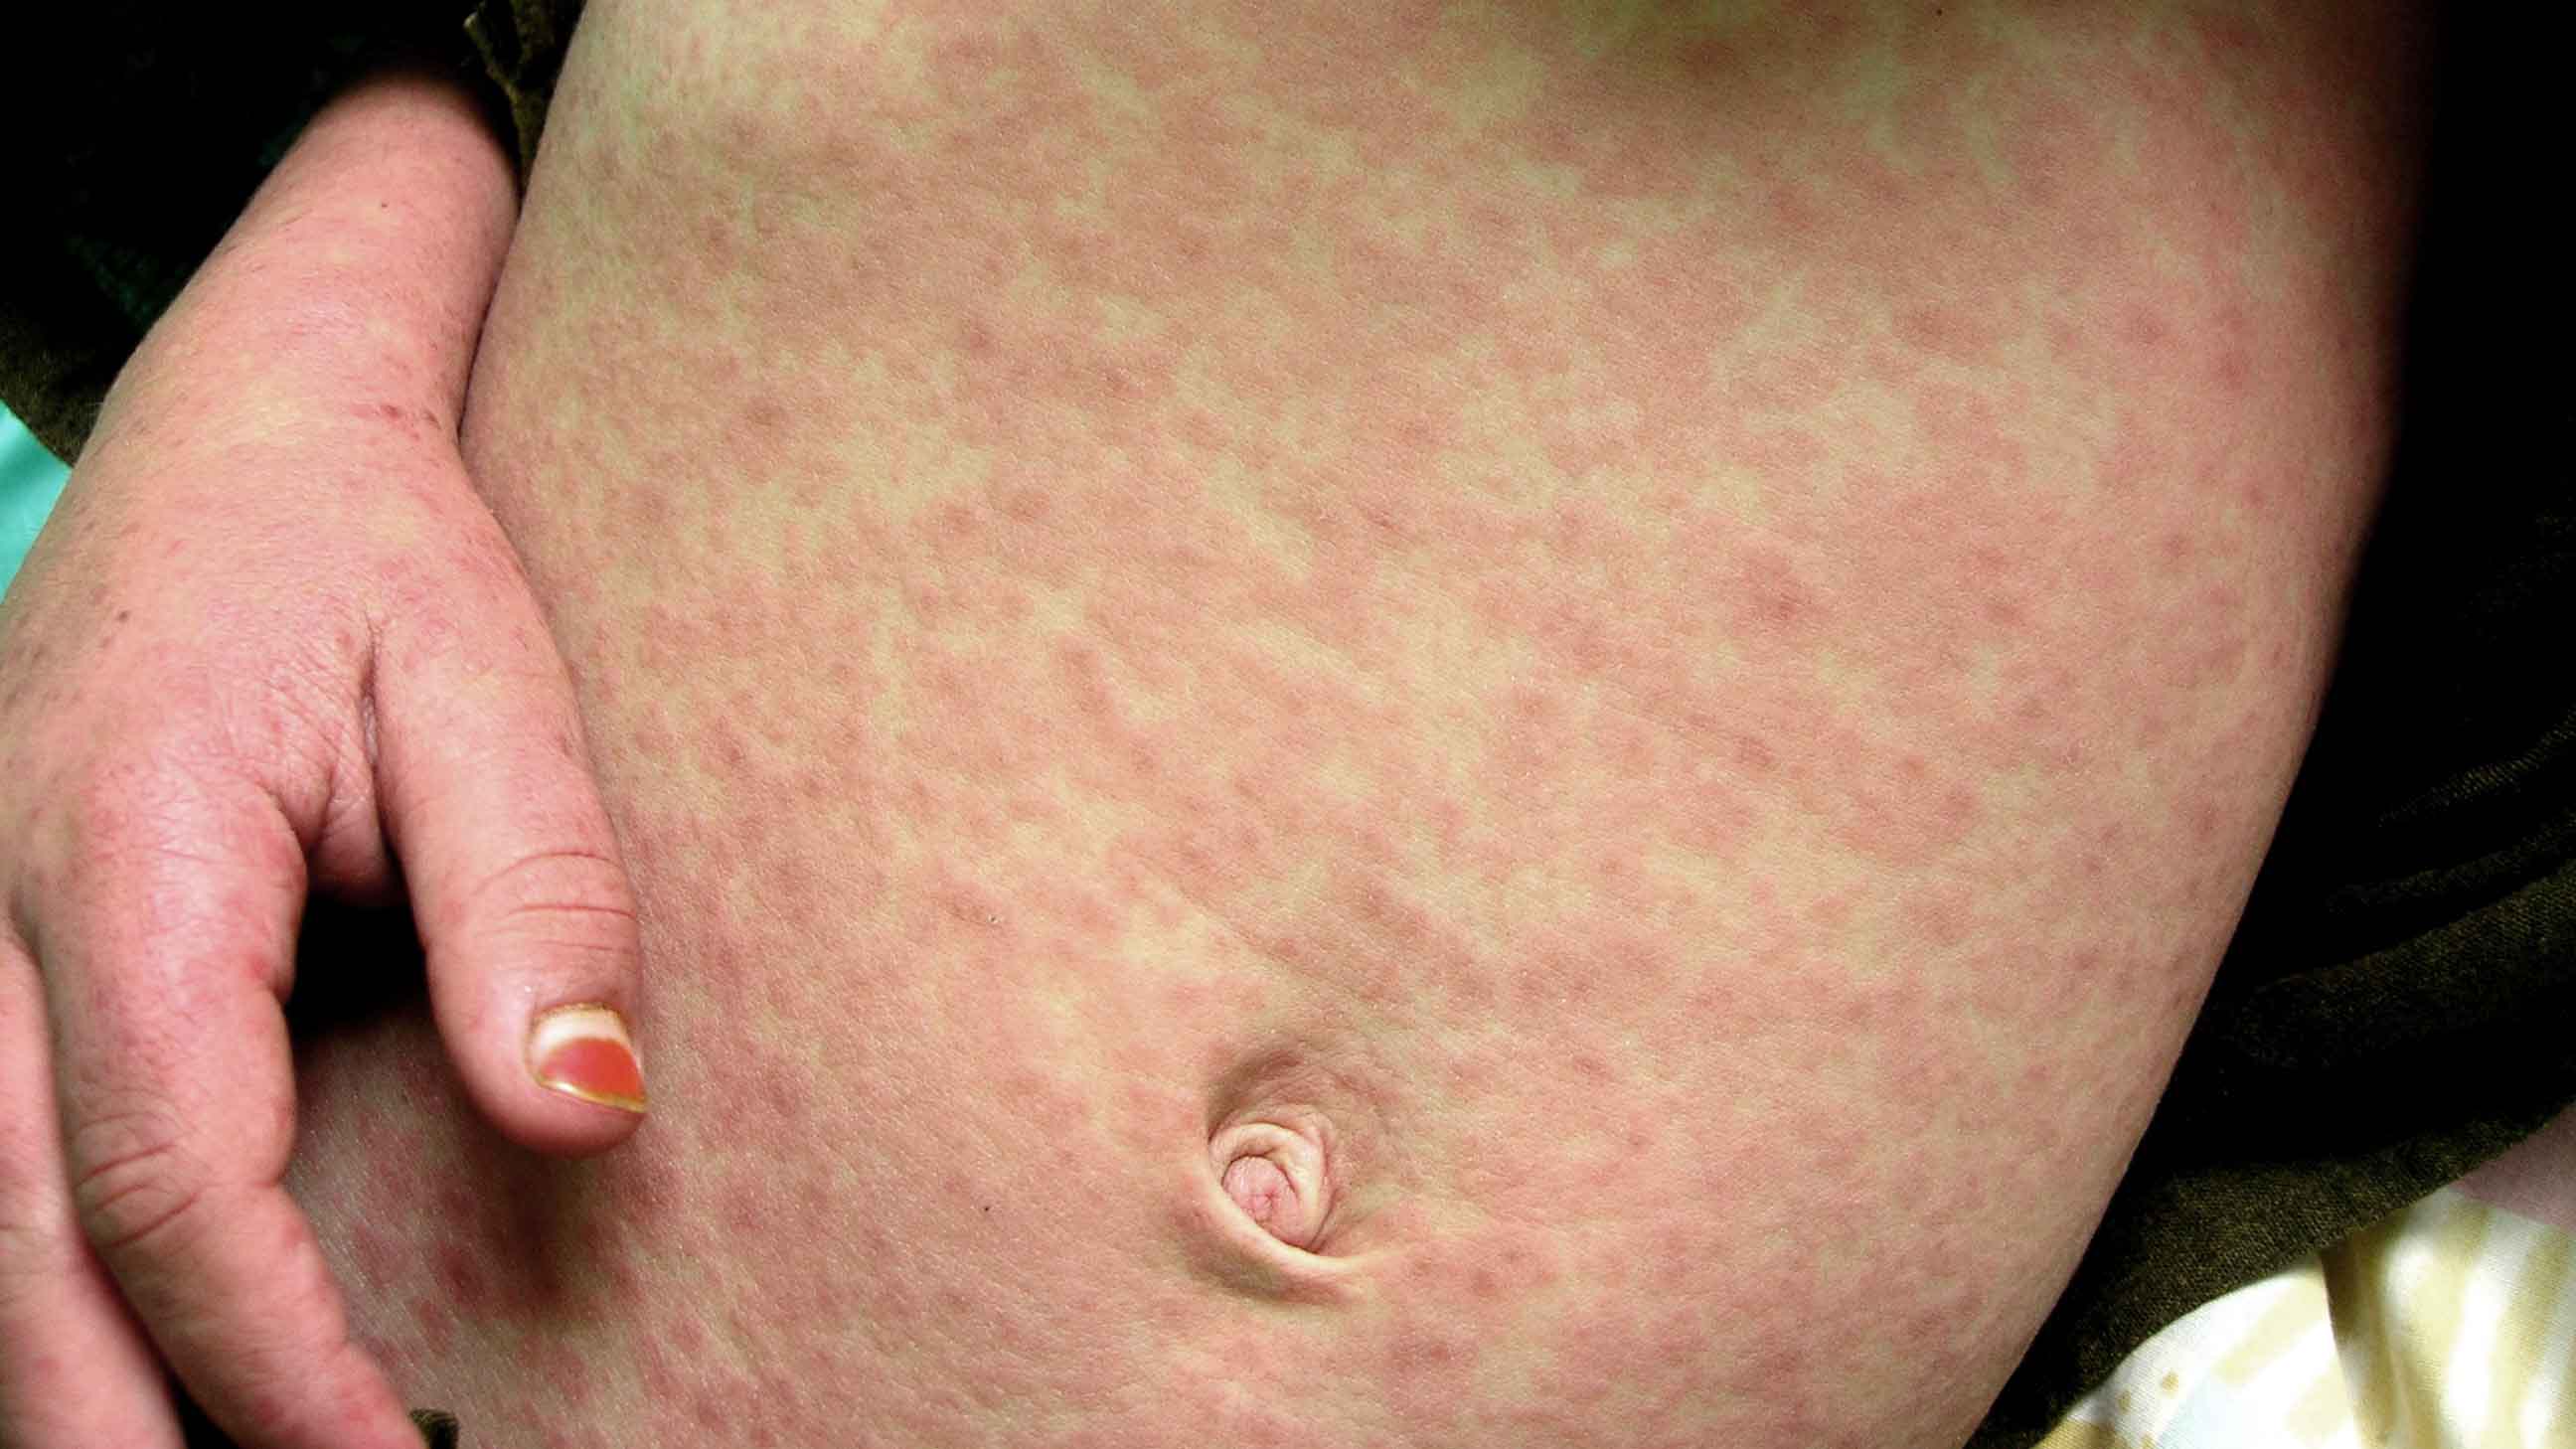 Measles cases have been documented in 22 states this year. One of the most recognizable symptoms is a full-body rash.